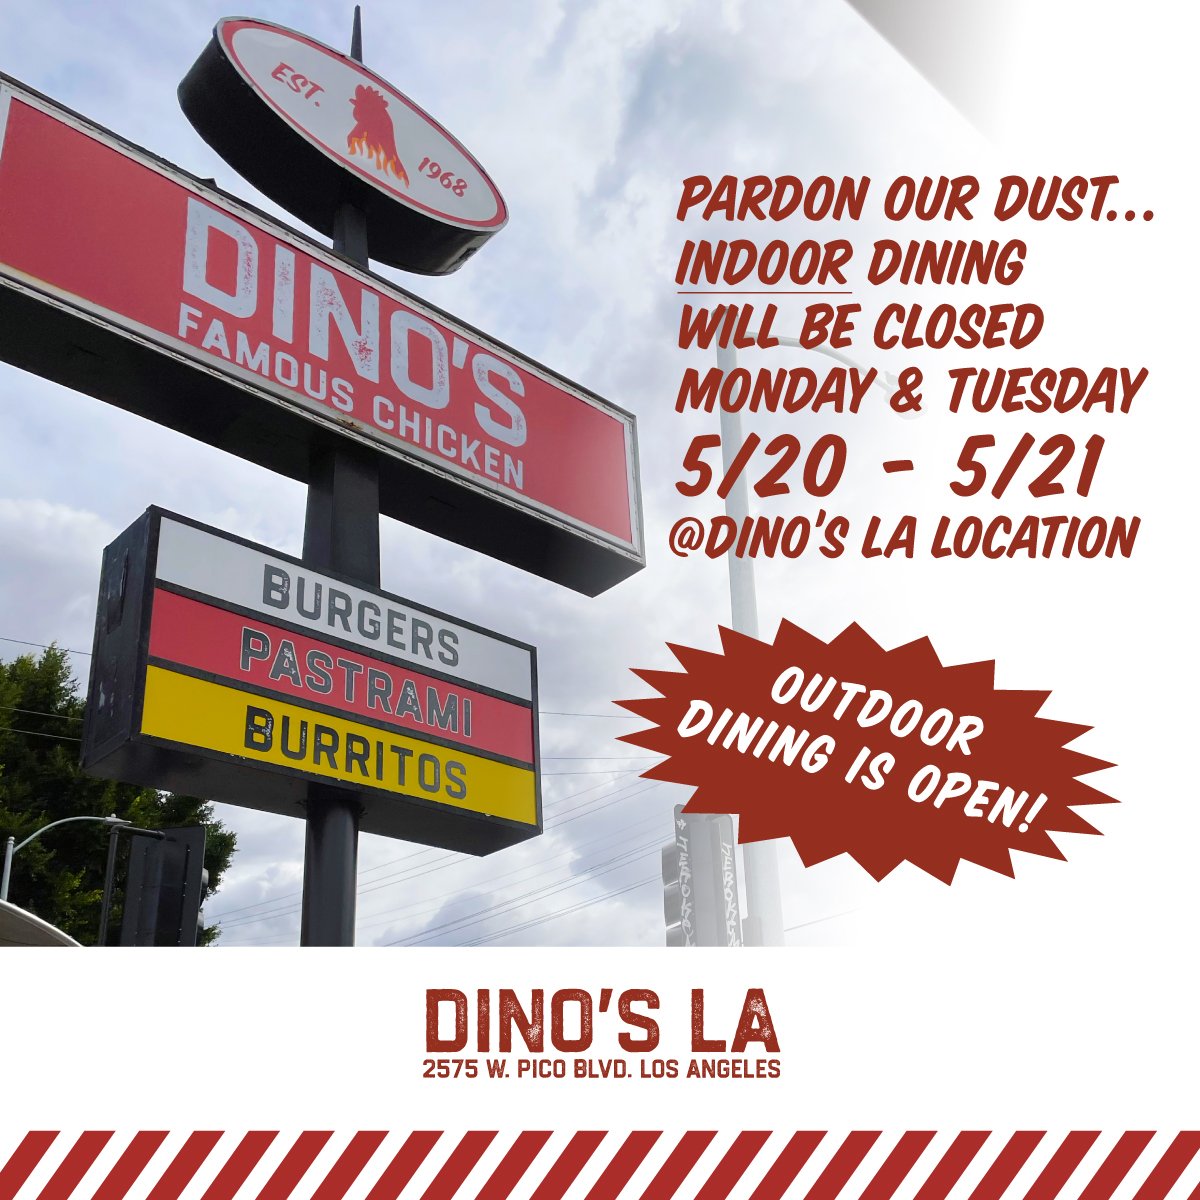 📍Original Dino's LA: 2575 W. Pico Blvd. ATTN: Indoor dining will be closed at the Dino's LA location today and tomorrow. The kitchen and outdoor dining is open!